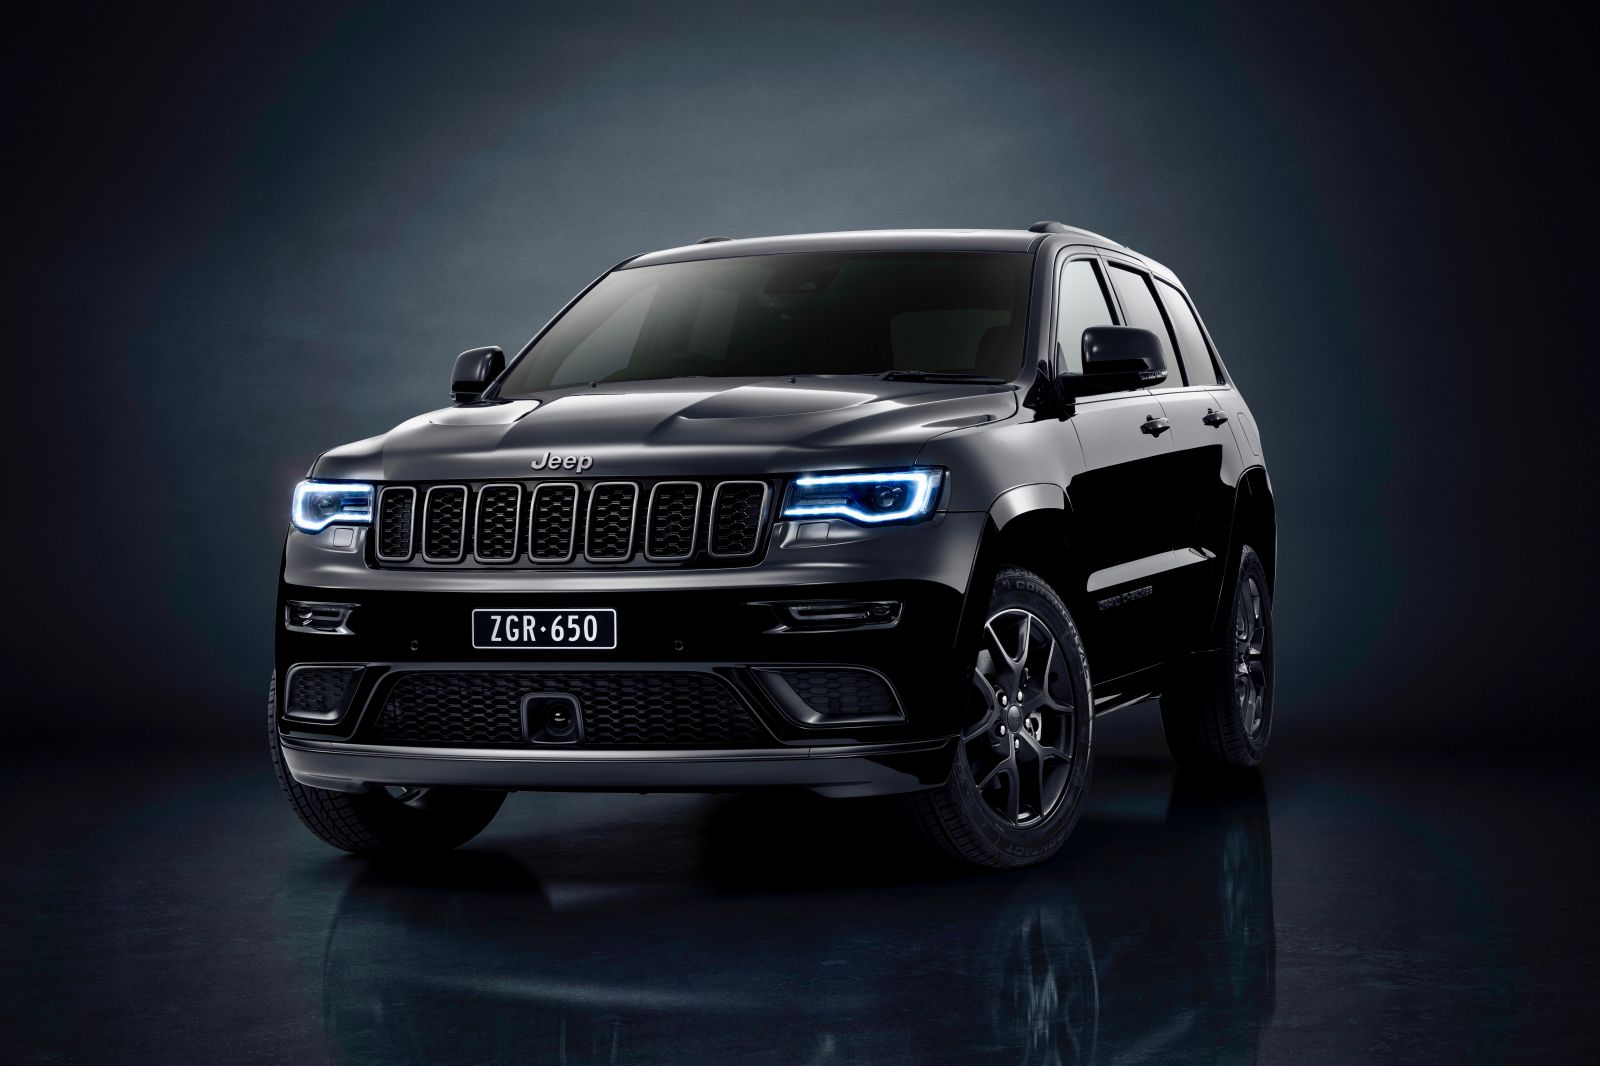 2021 Jeep Grand Cherokee price and specs | CarExpert